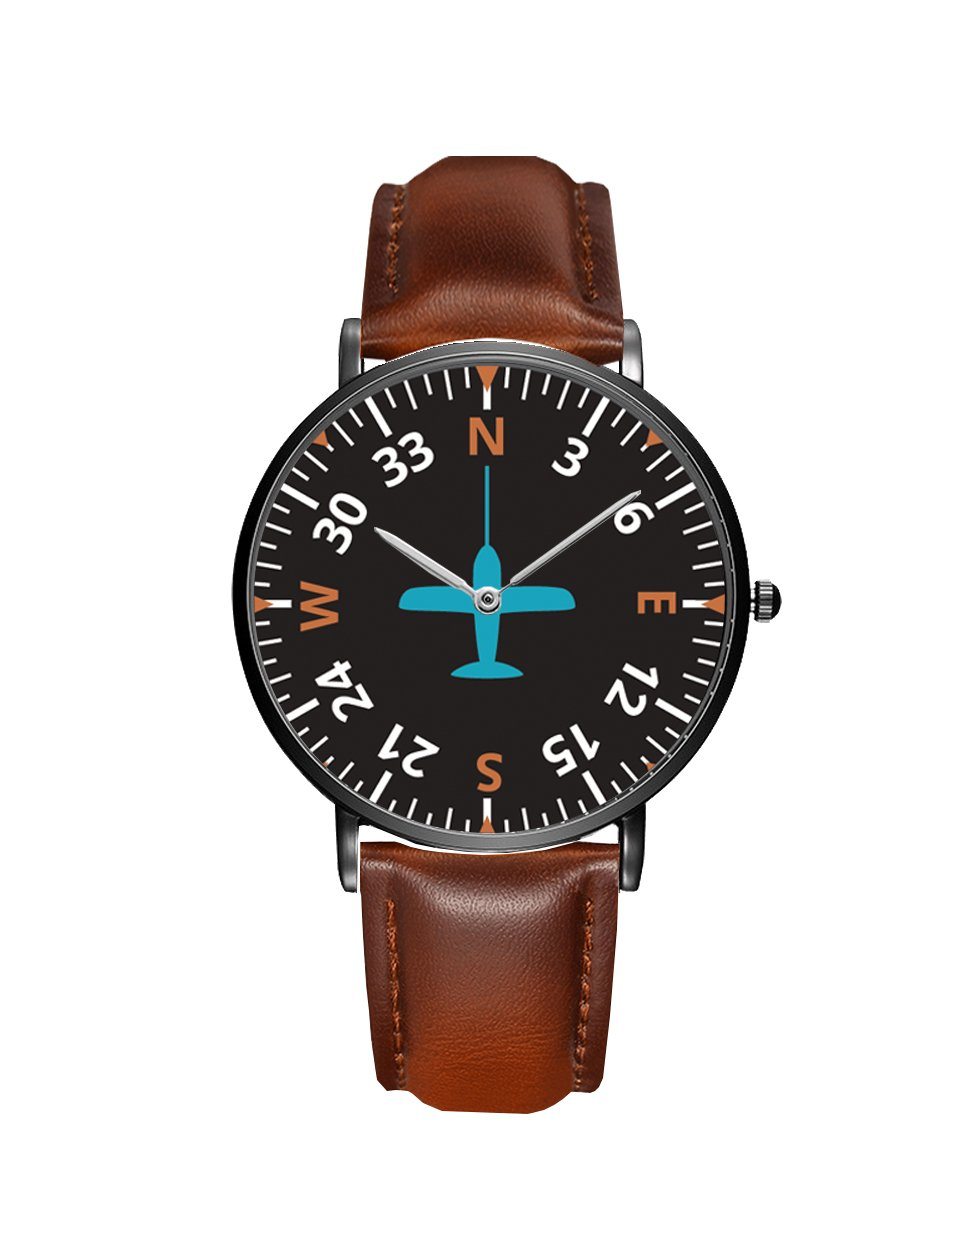 Airplane Instrument Series (Heading2) Leather Strap Watches Pilot Eyes Store Black & Brown Leather Strap 